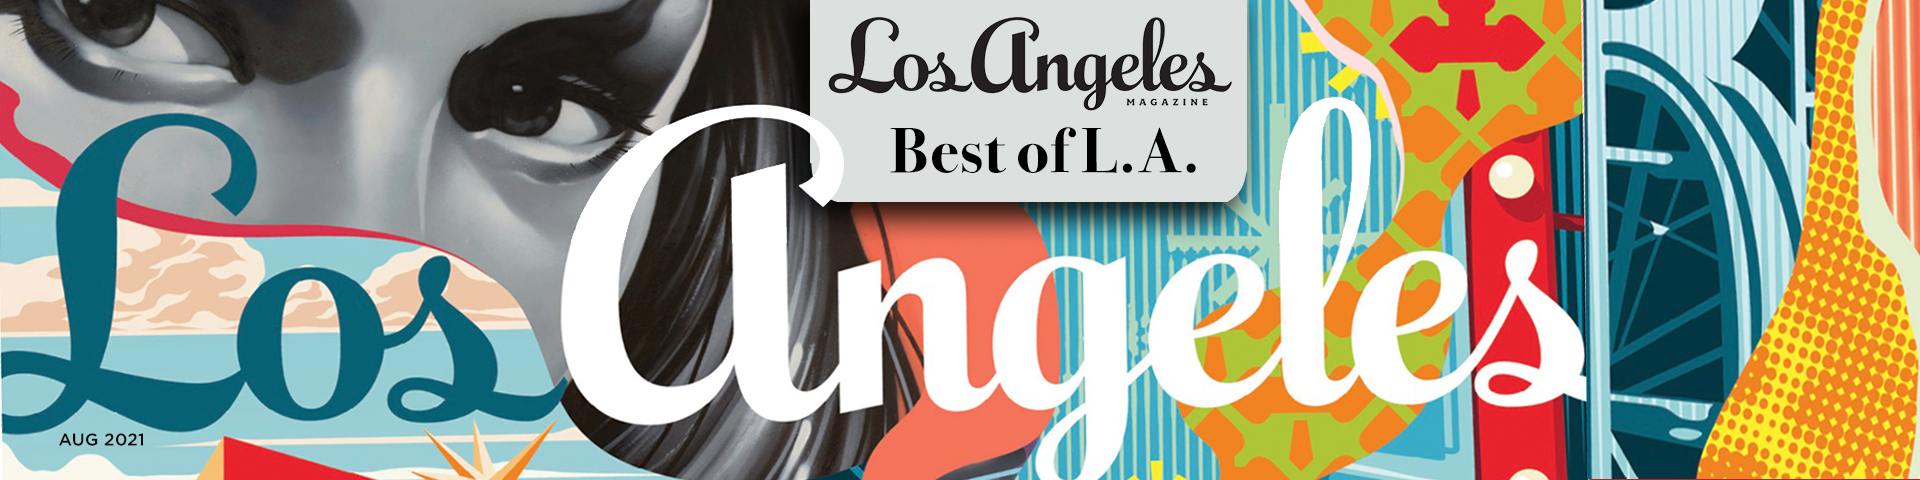 A color display of graffiti. Los Angeles is written across in big letters and Best of LA is written about that in smaller text.